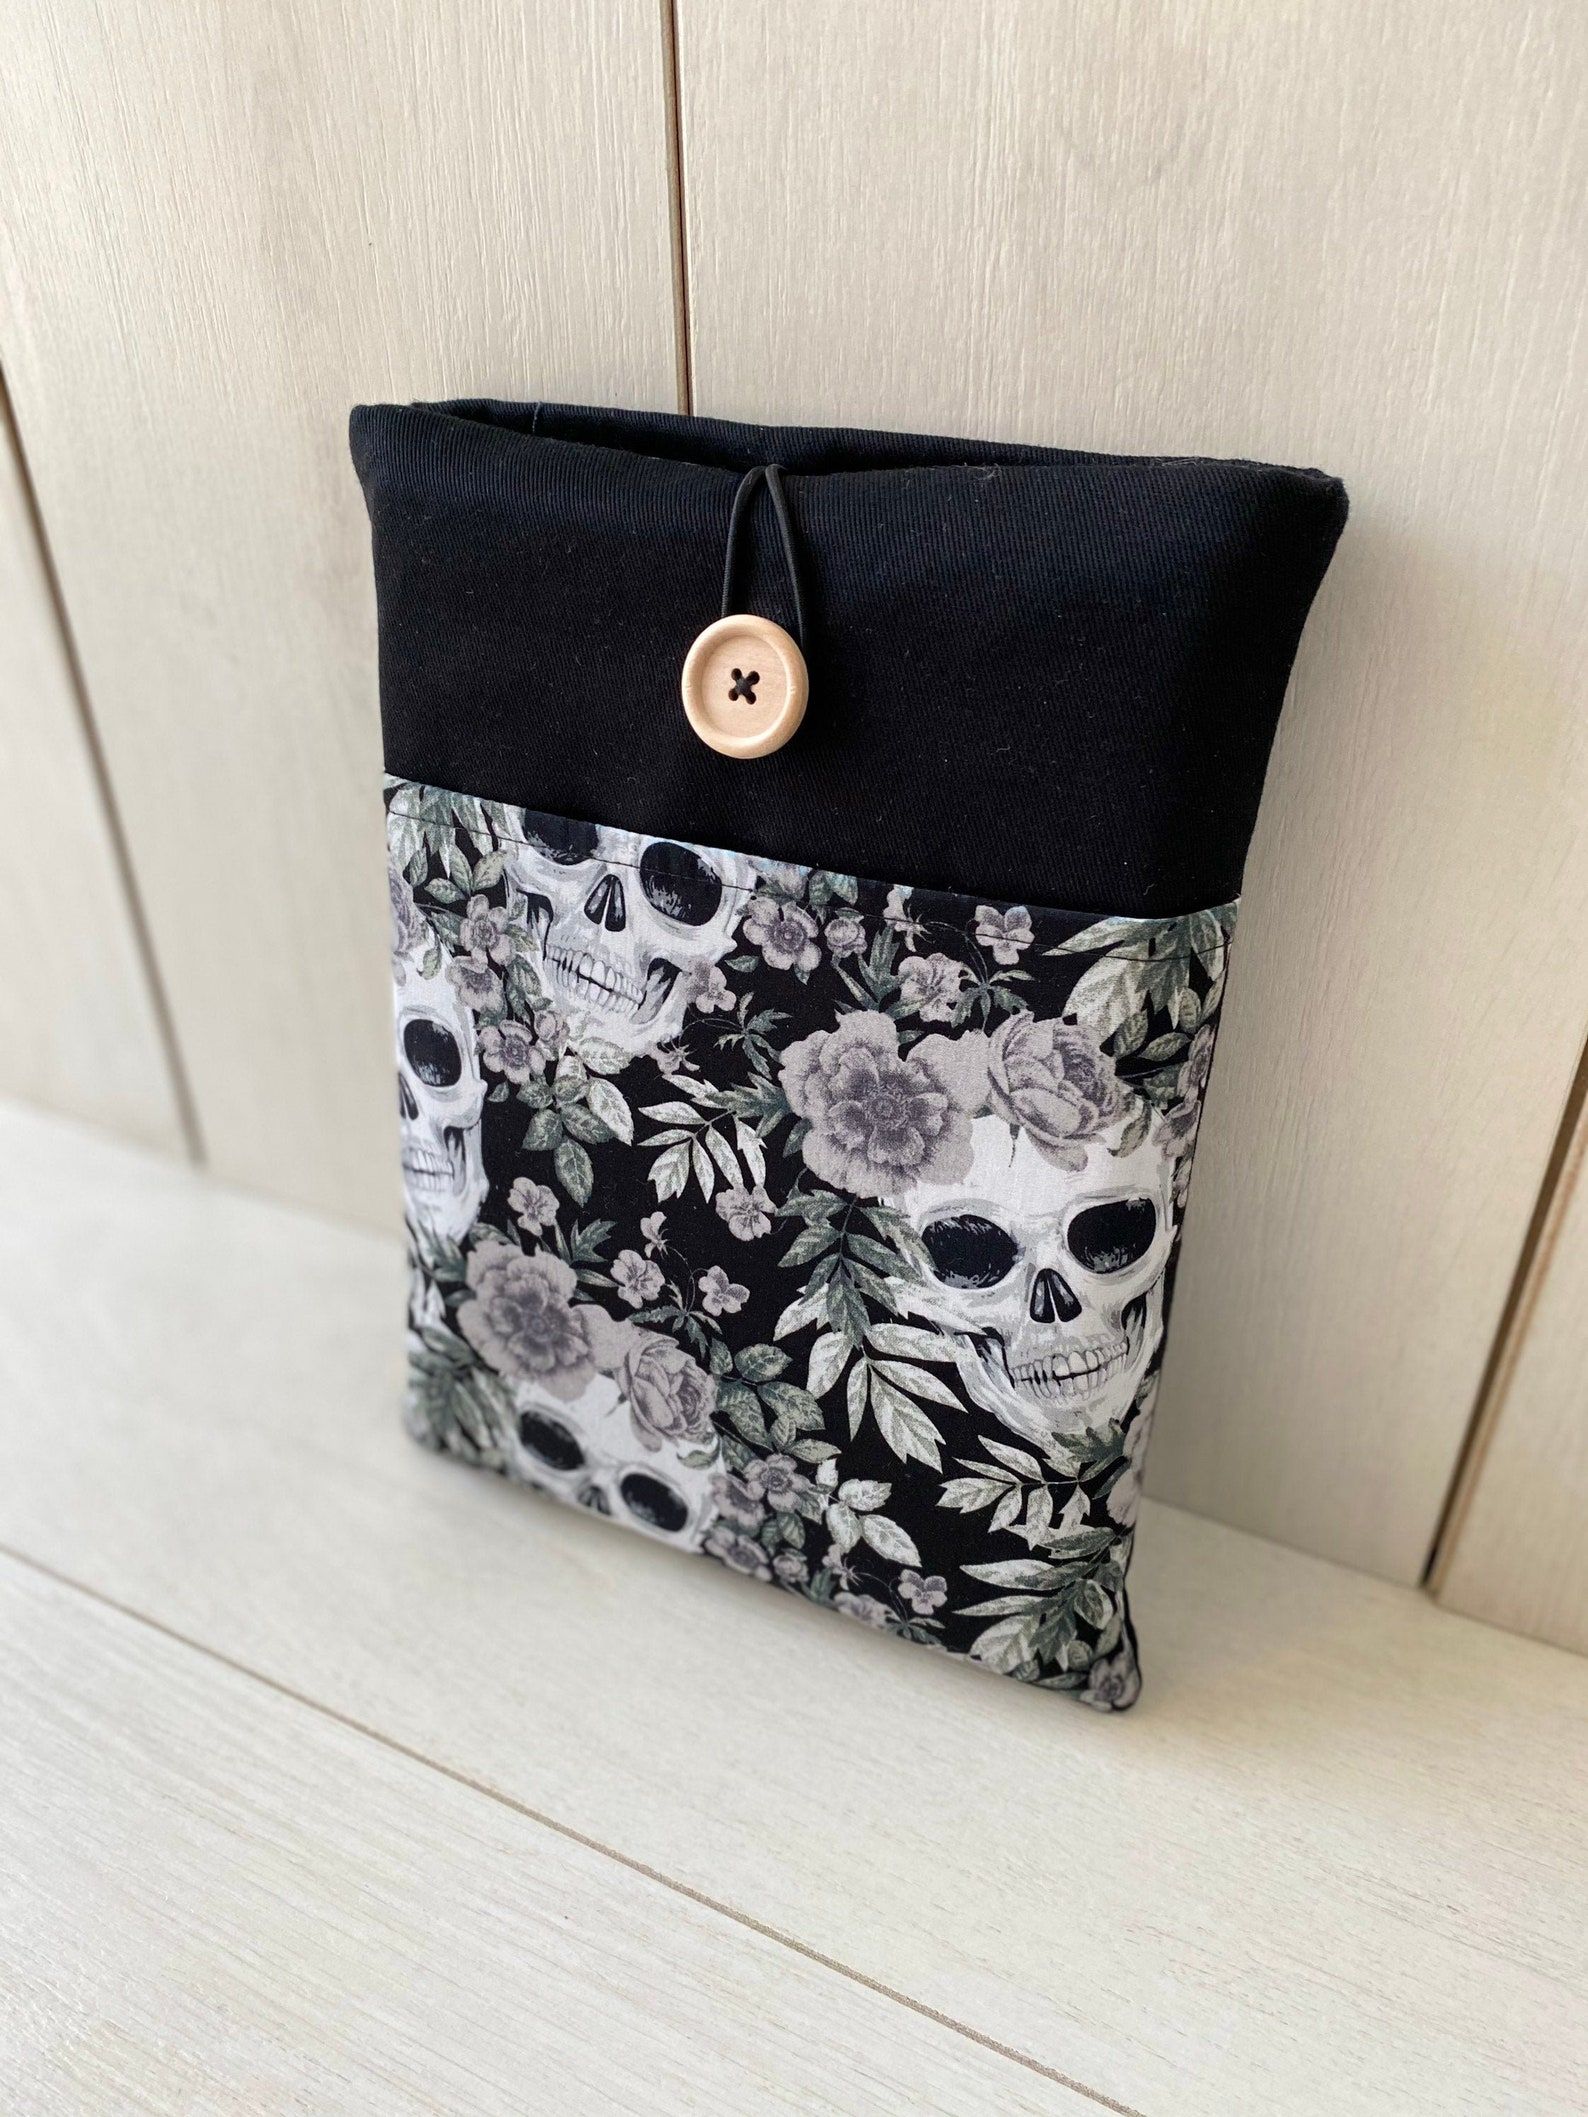 A book sleeve made in black and grey skulls and roses, with black accents and a button closure.